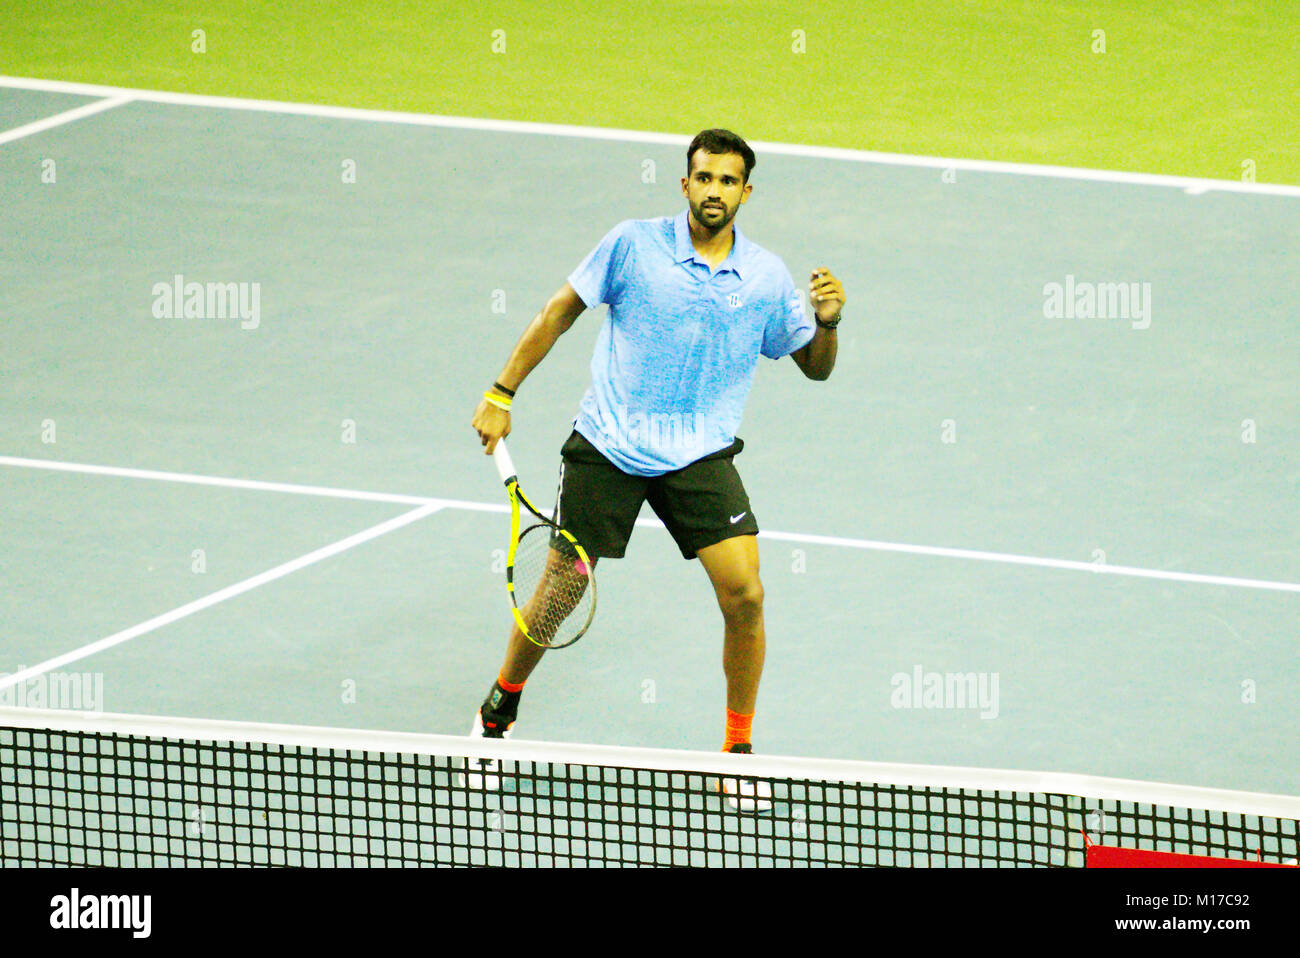 Pune, India. 2nd January 2018. Arjun Kadhe of India, in action in the first round of the Tata Open Maharashtra Tennis tournament. Stock Photo